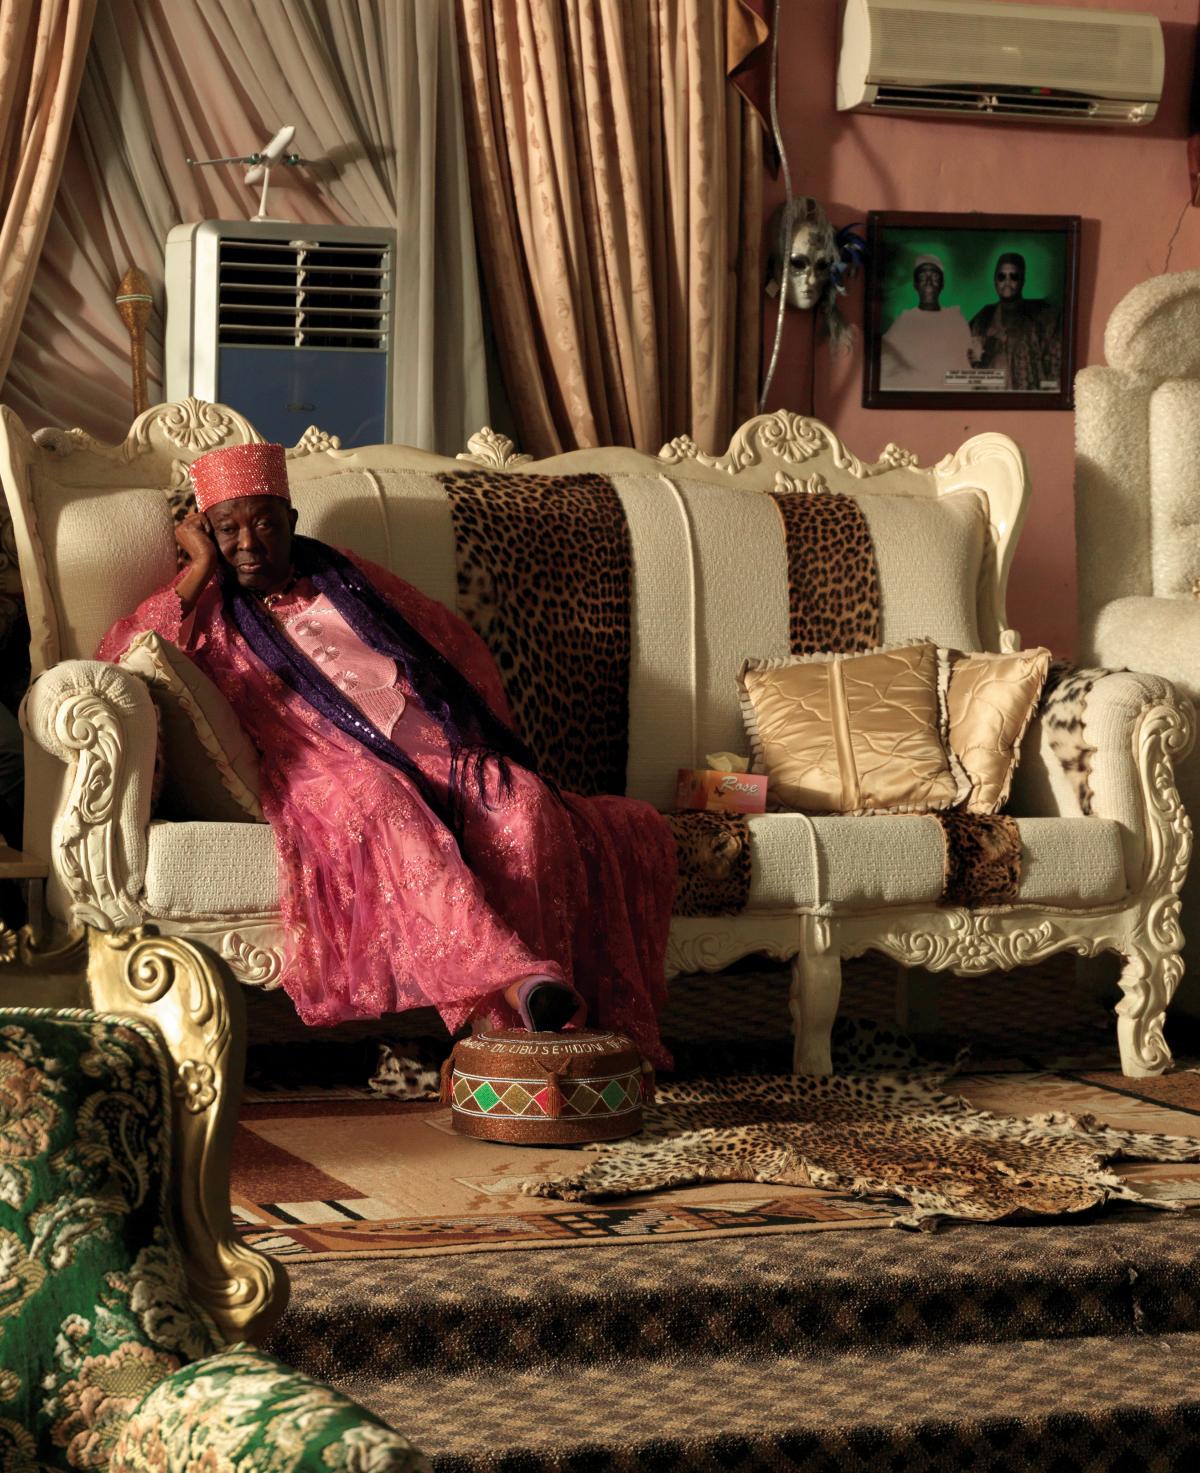 HRM Alayeluwa Oba Okunade Sijuwade, the Ooni of Ife, seated on a couch, wearing traditional, red robes, head resting on his hand